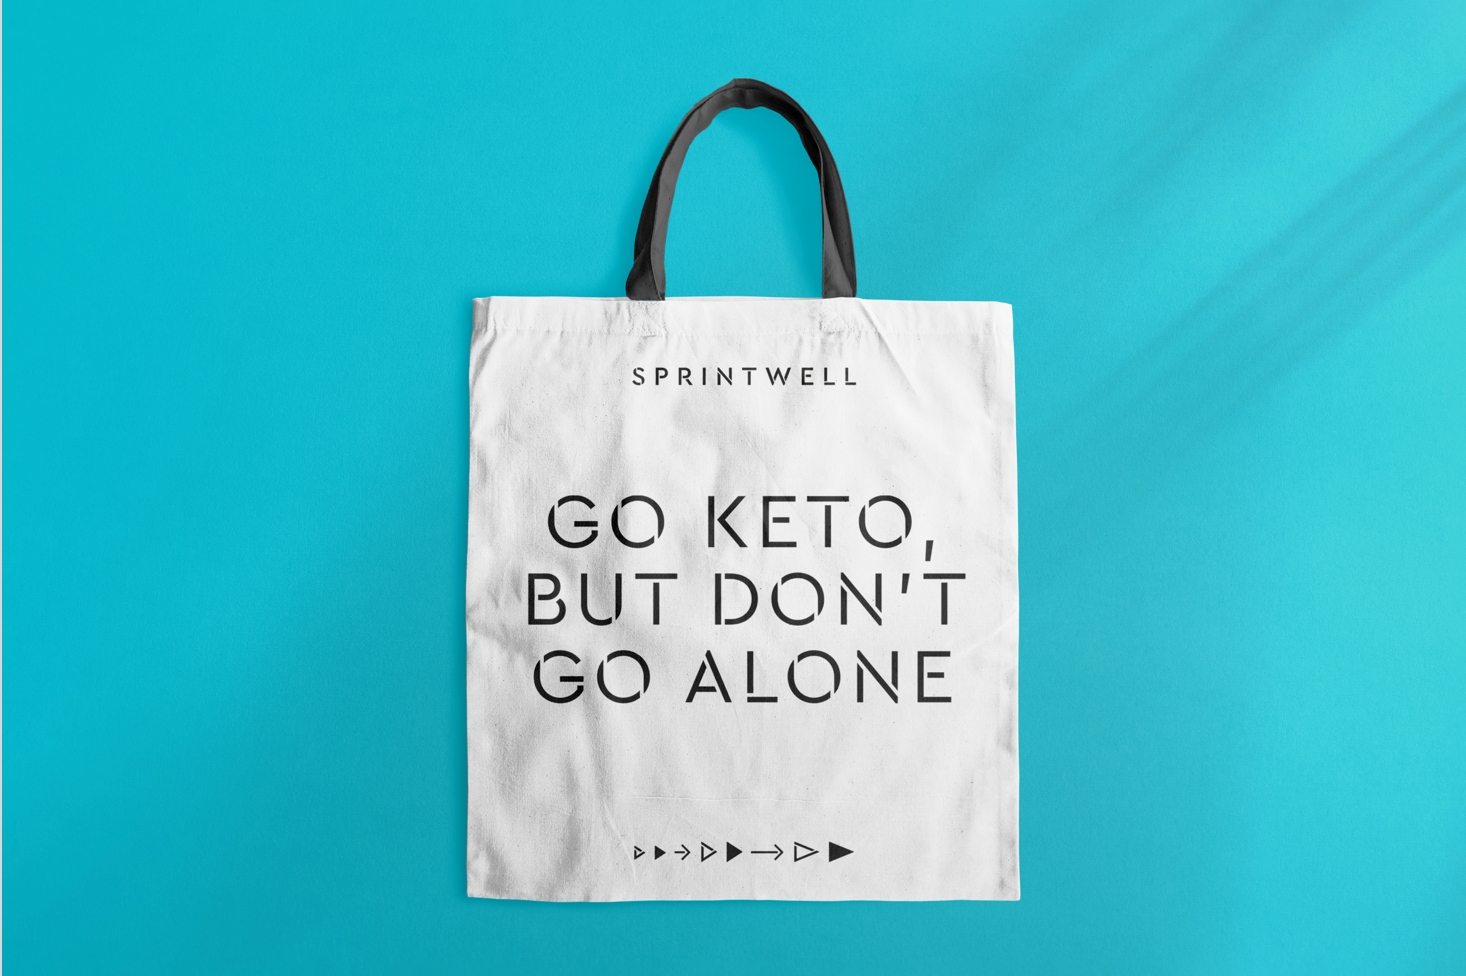 A white Sprintwell-branded tote bag with black handles with text “Go Keto but Don’t go alone” and iconography sits on a teal background.